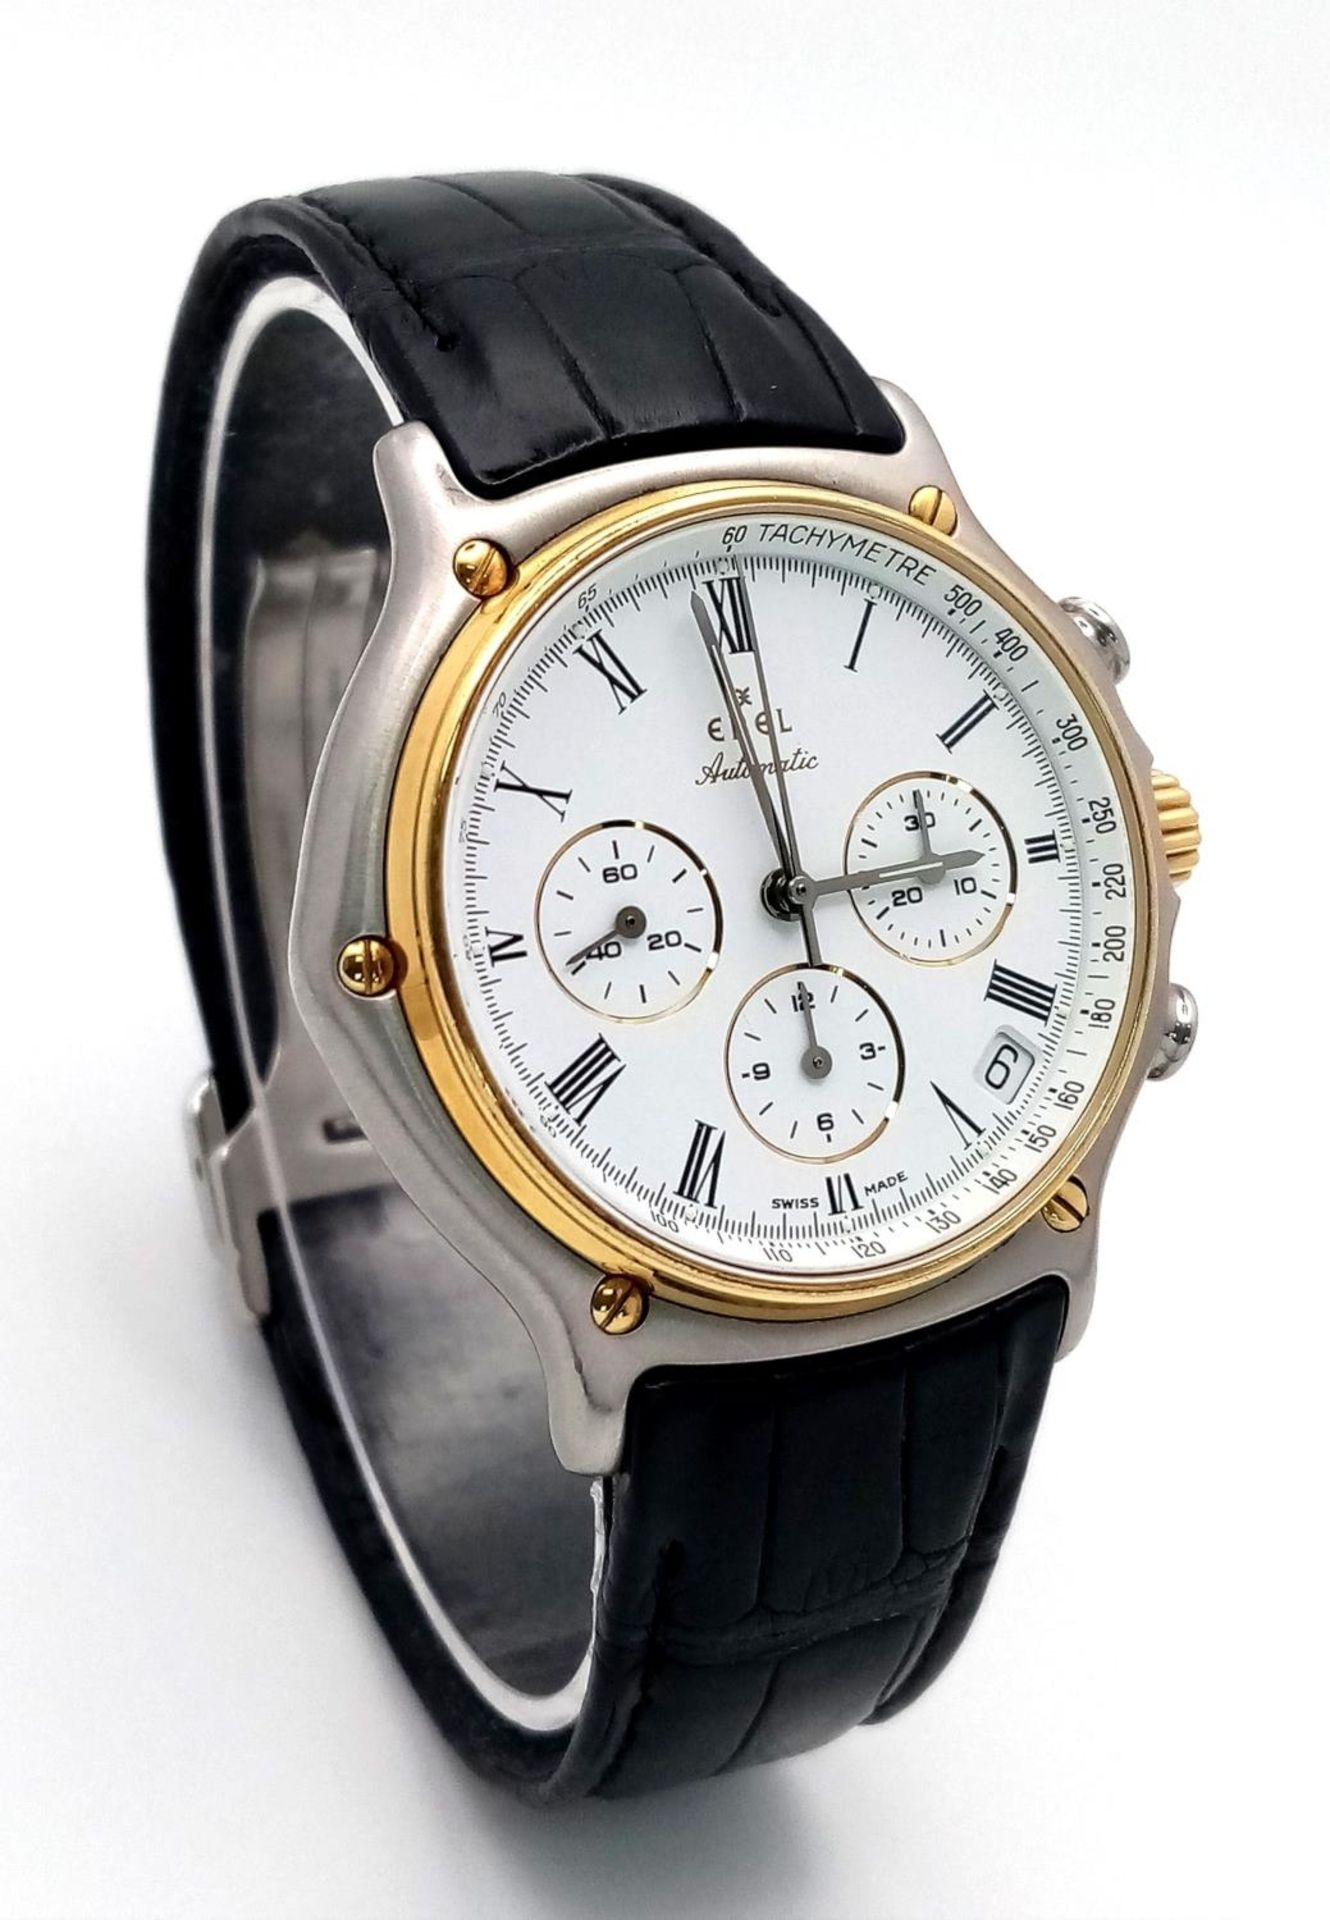 An Ebel Automatic Chronograph Gents Watch. Black leather strap. Two tone case - 38mm. White dial - Image 4 of 8